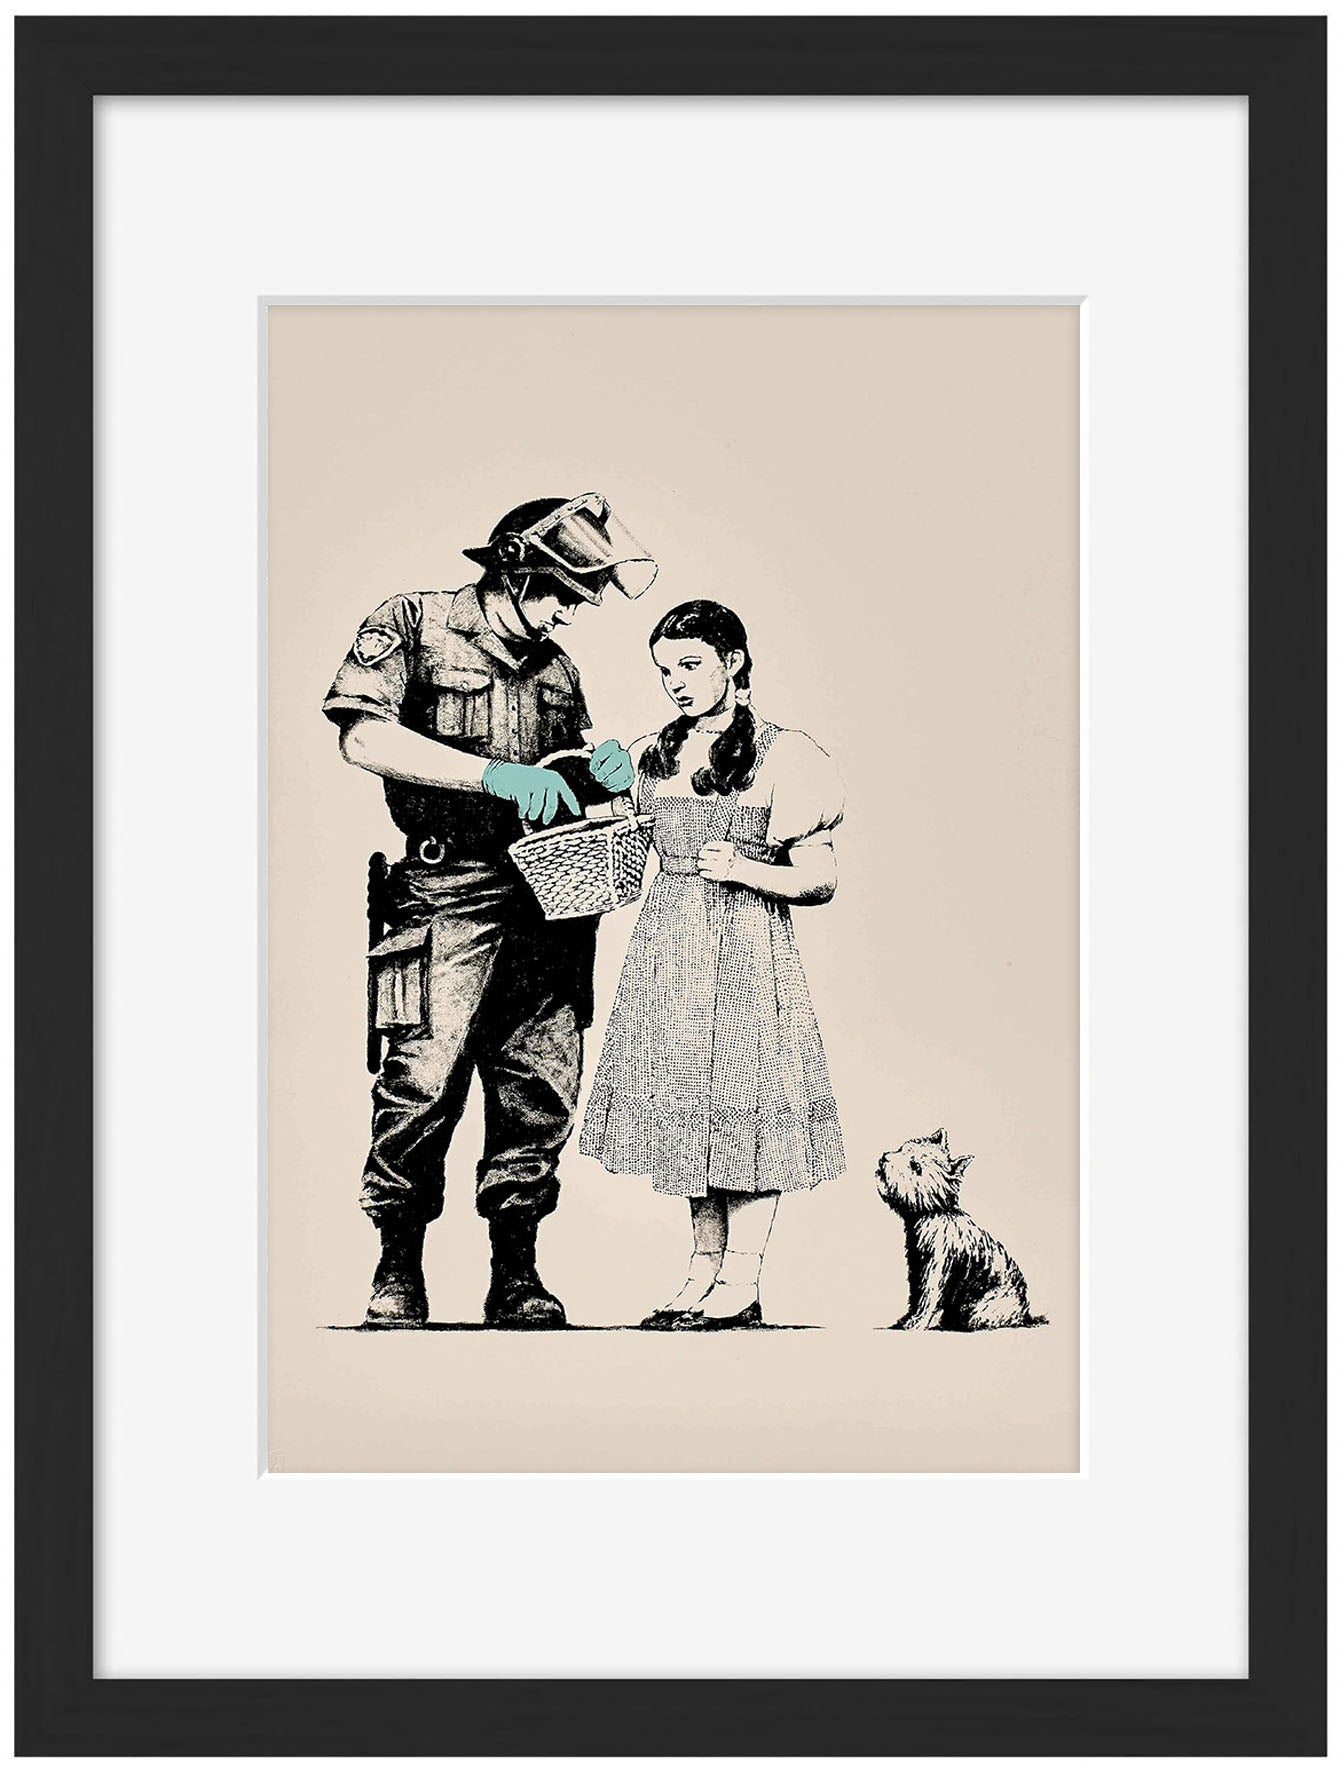 Stop and Search-banksy, print-Framed Print-30 x 40 cm-BLUE SHAKER